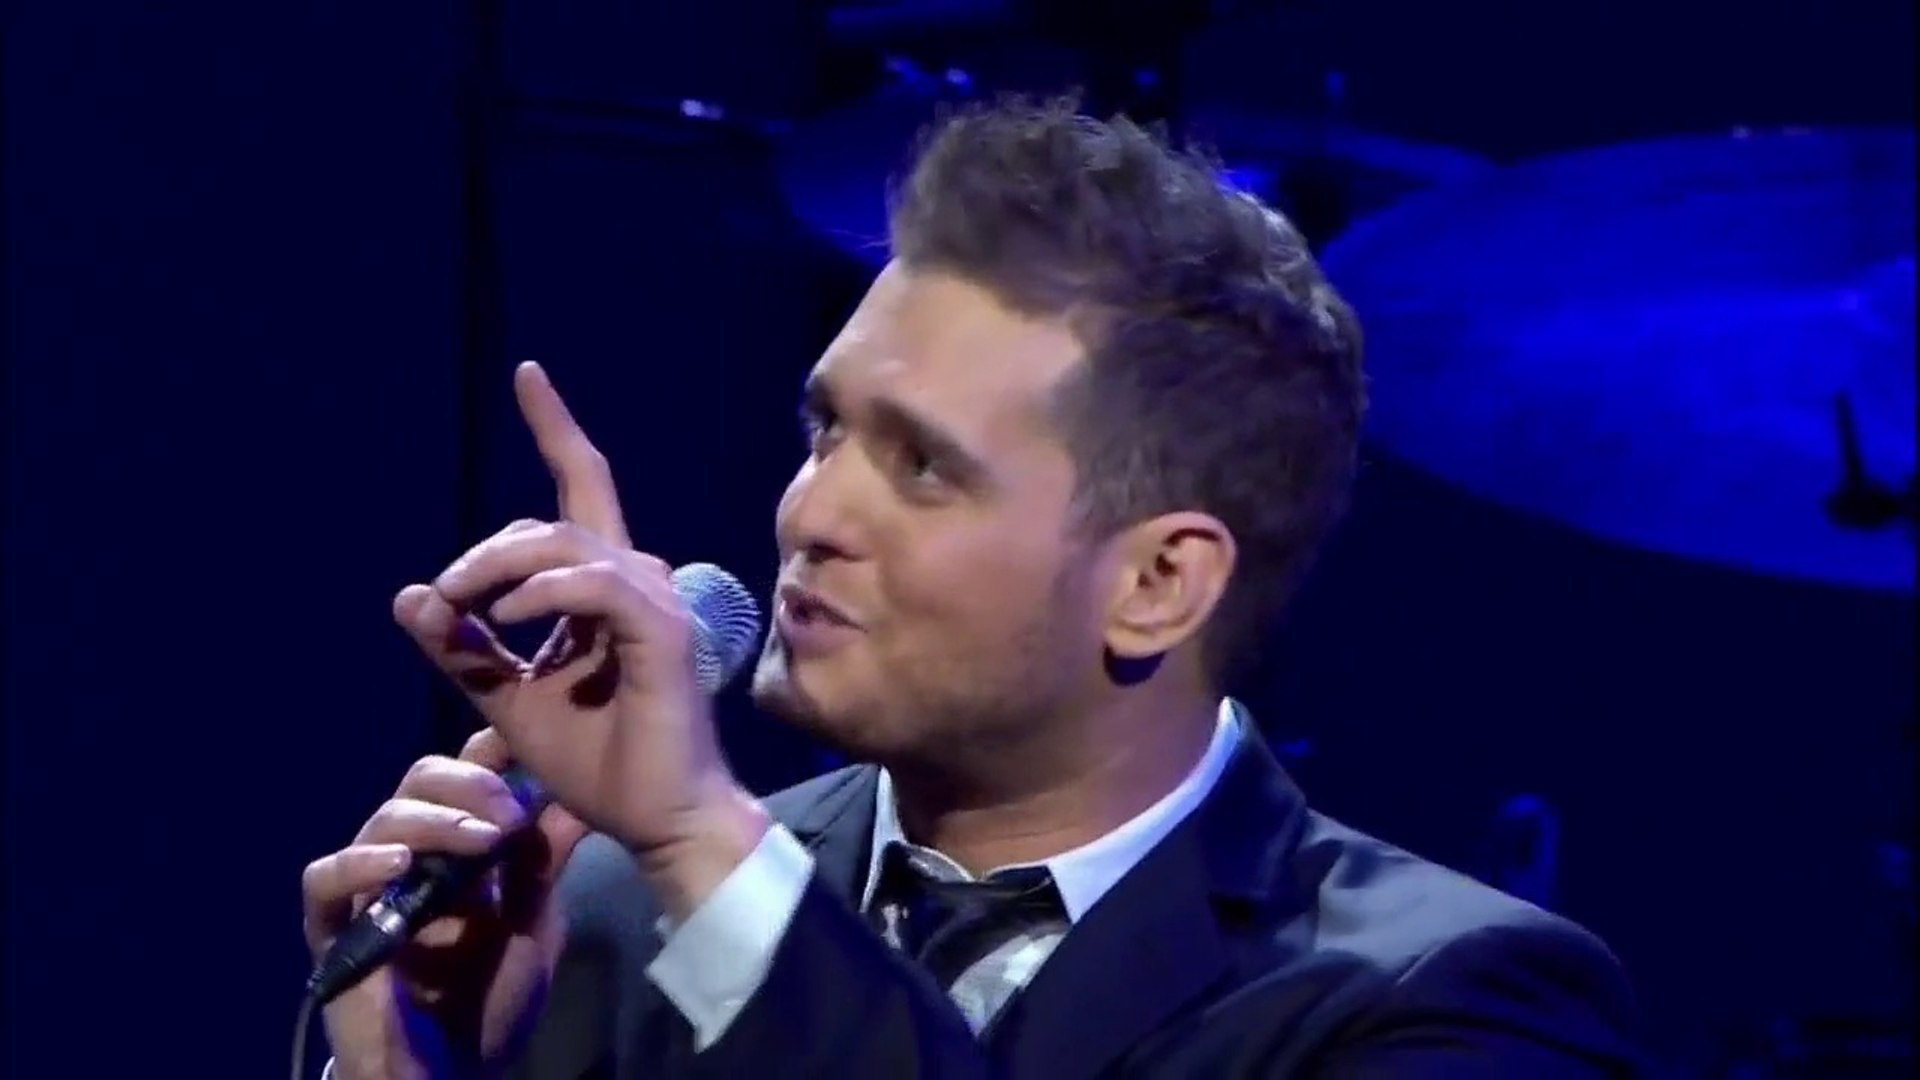 Michael Bublé - Home (Live) - video Dailymotion